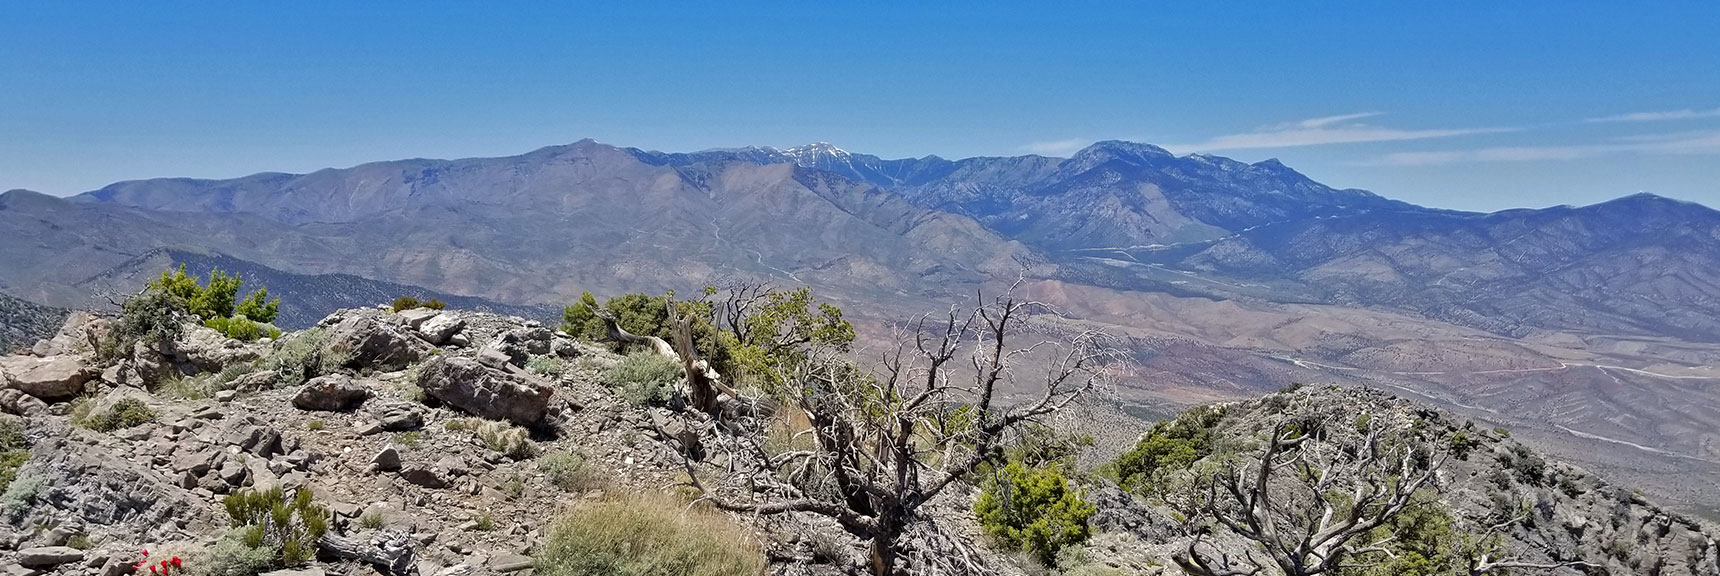 View South of Mt Charleston Wilderness Toward Lovell Canyon | La Madre Mountain Northern Approach, Nevada